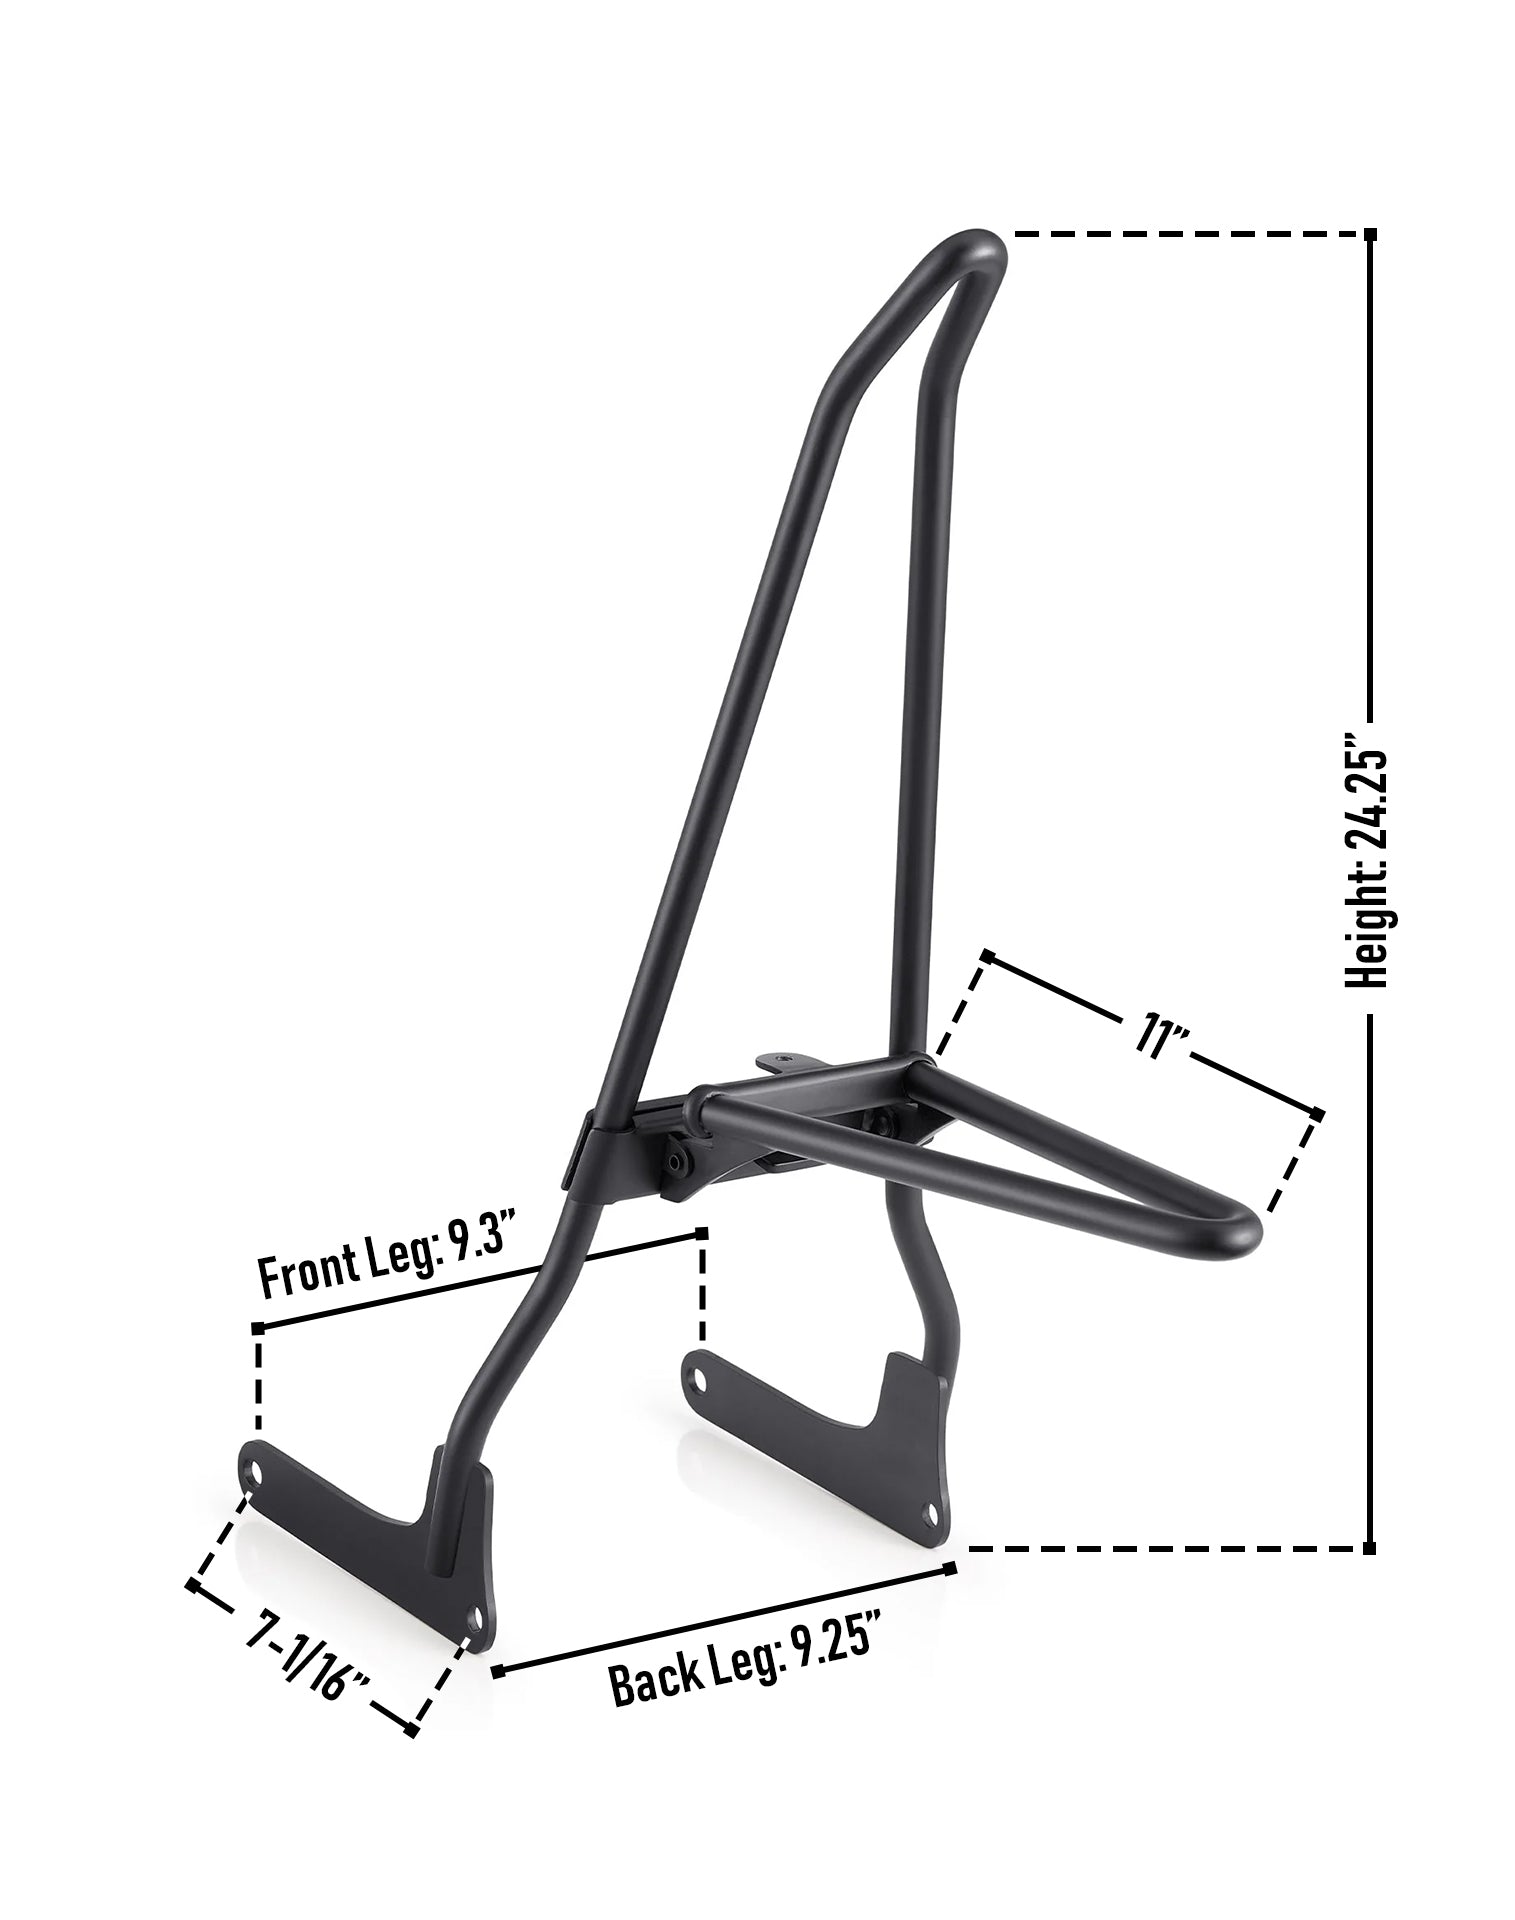 Iron Born Blade 25" Sissy Bar with Foldable Luggage Rack for Harley Softail Deluxe FLDE Matte Black Dimension